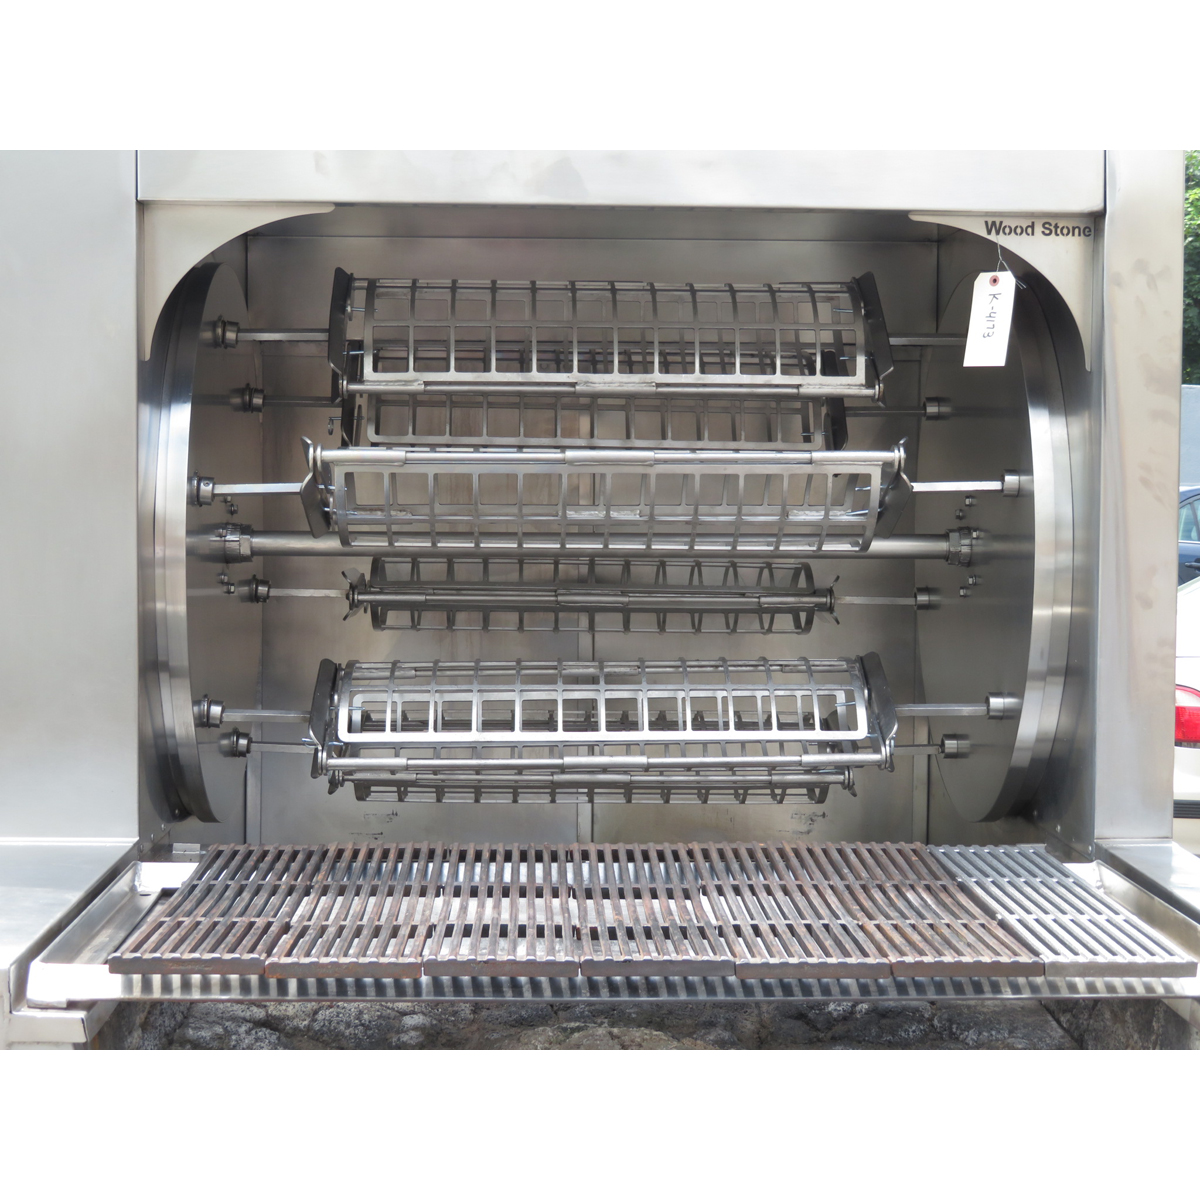 Woodstone MT. OLYMPUS WS-SFR-6-SB Stone Fired Rotisserie on Wheels with Cooking Grill, Used Excellent Condition image 1